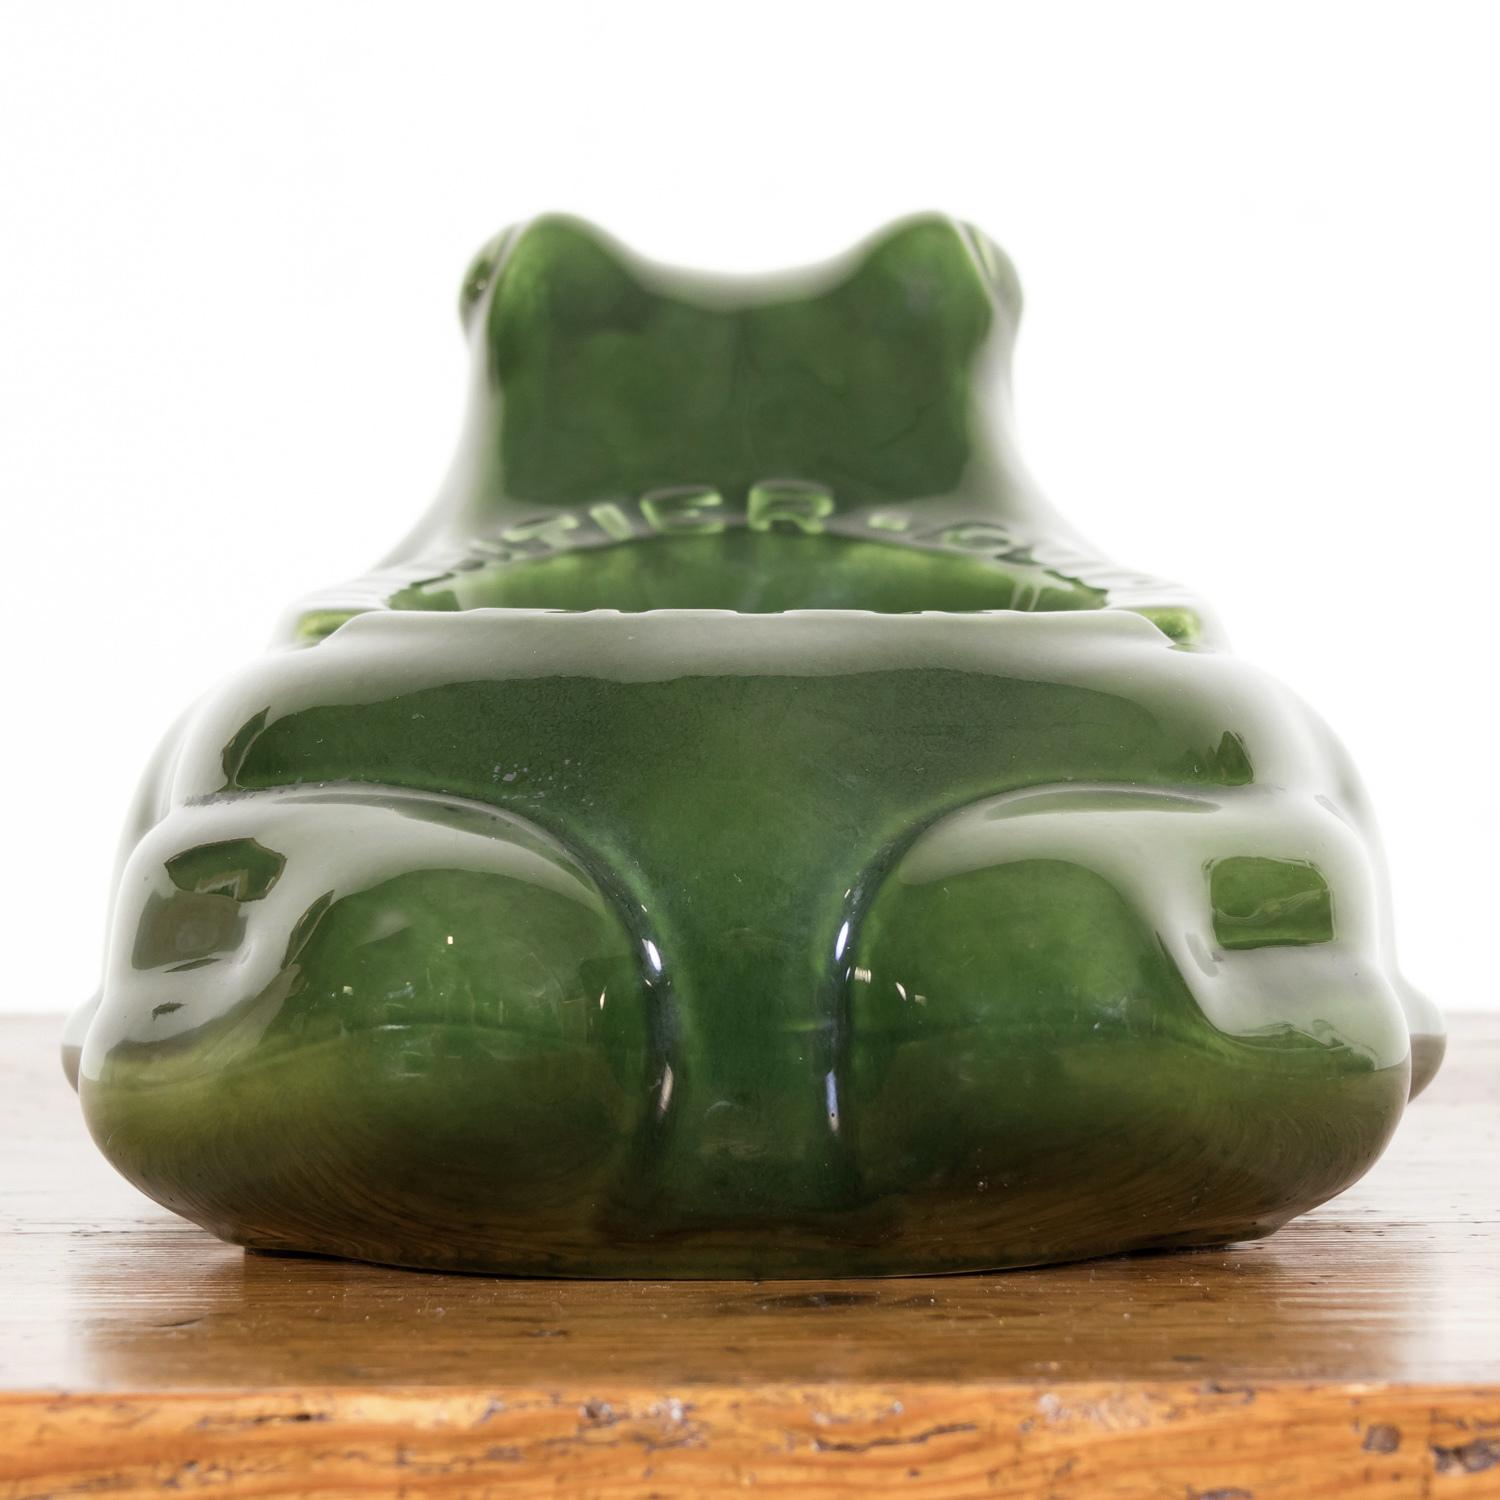 Large Vintage French L'HERITIER GUYOT DIJON Green Ceramic Frog Ad Ashtray For Sale 3